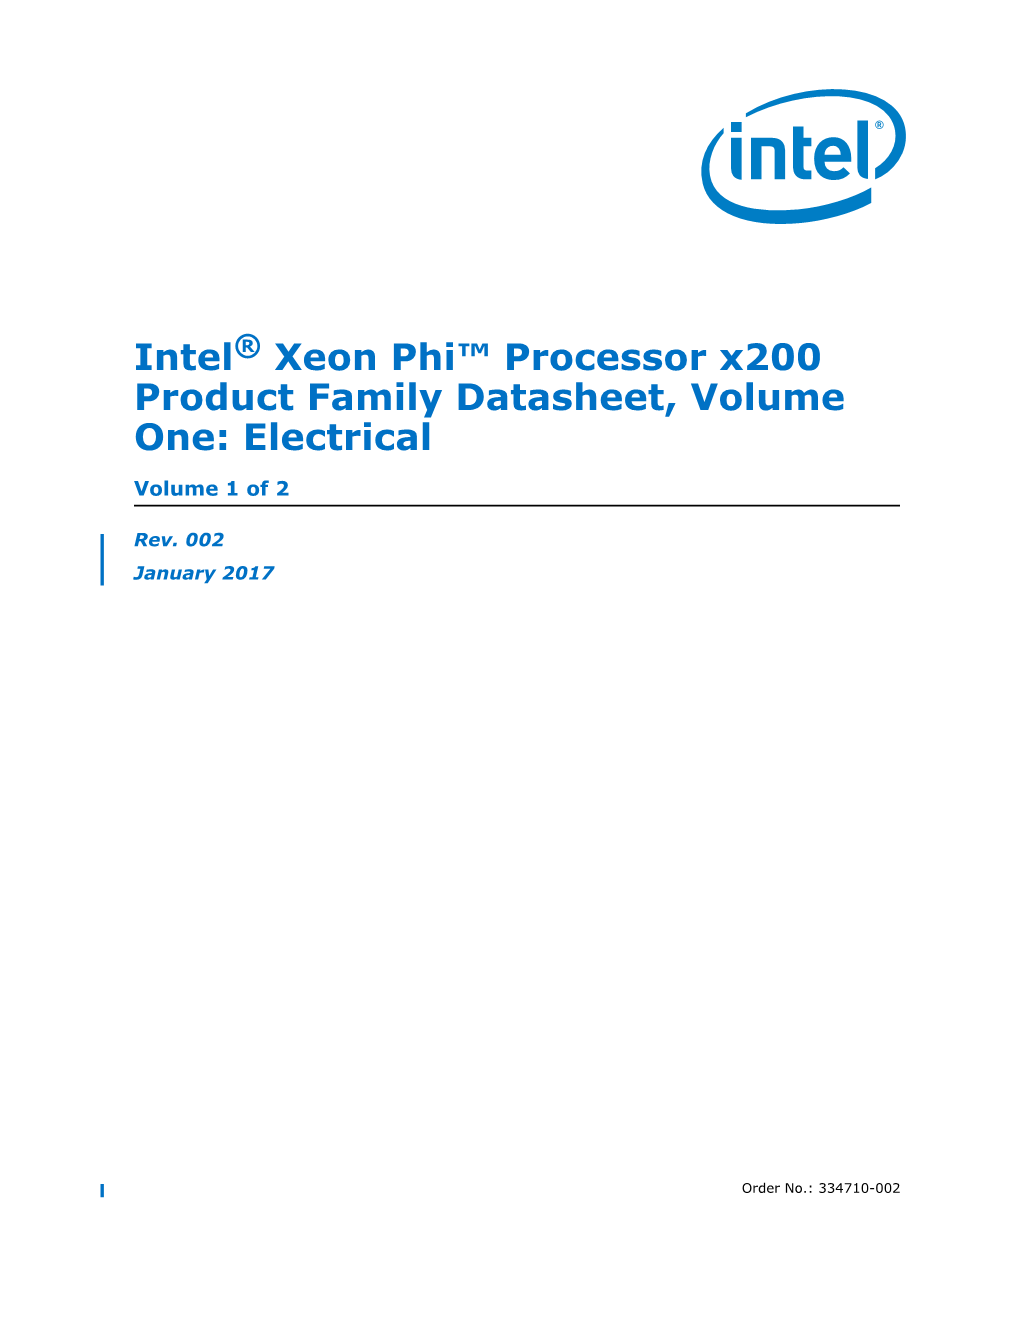 Xeon Phi™ Processor X200 Product Family Datasheet, Volume One: Electrical